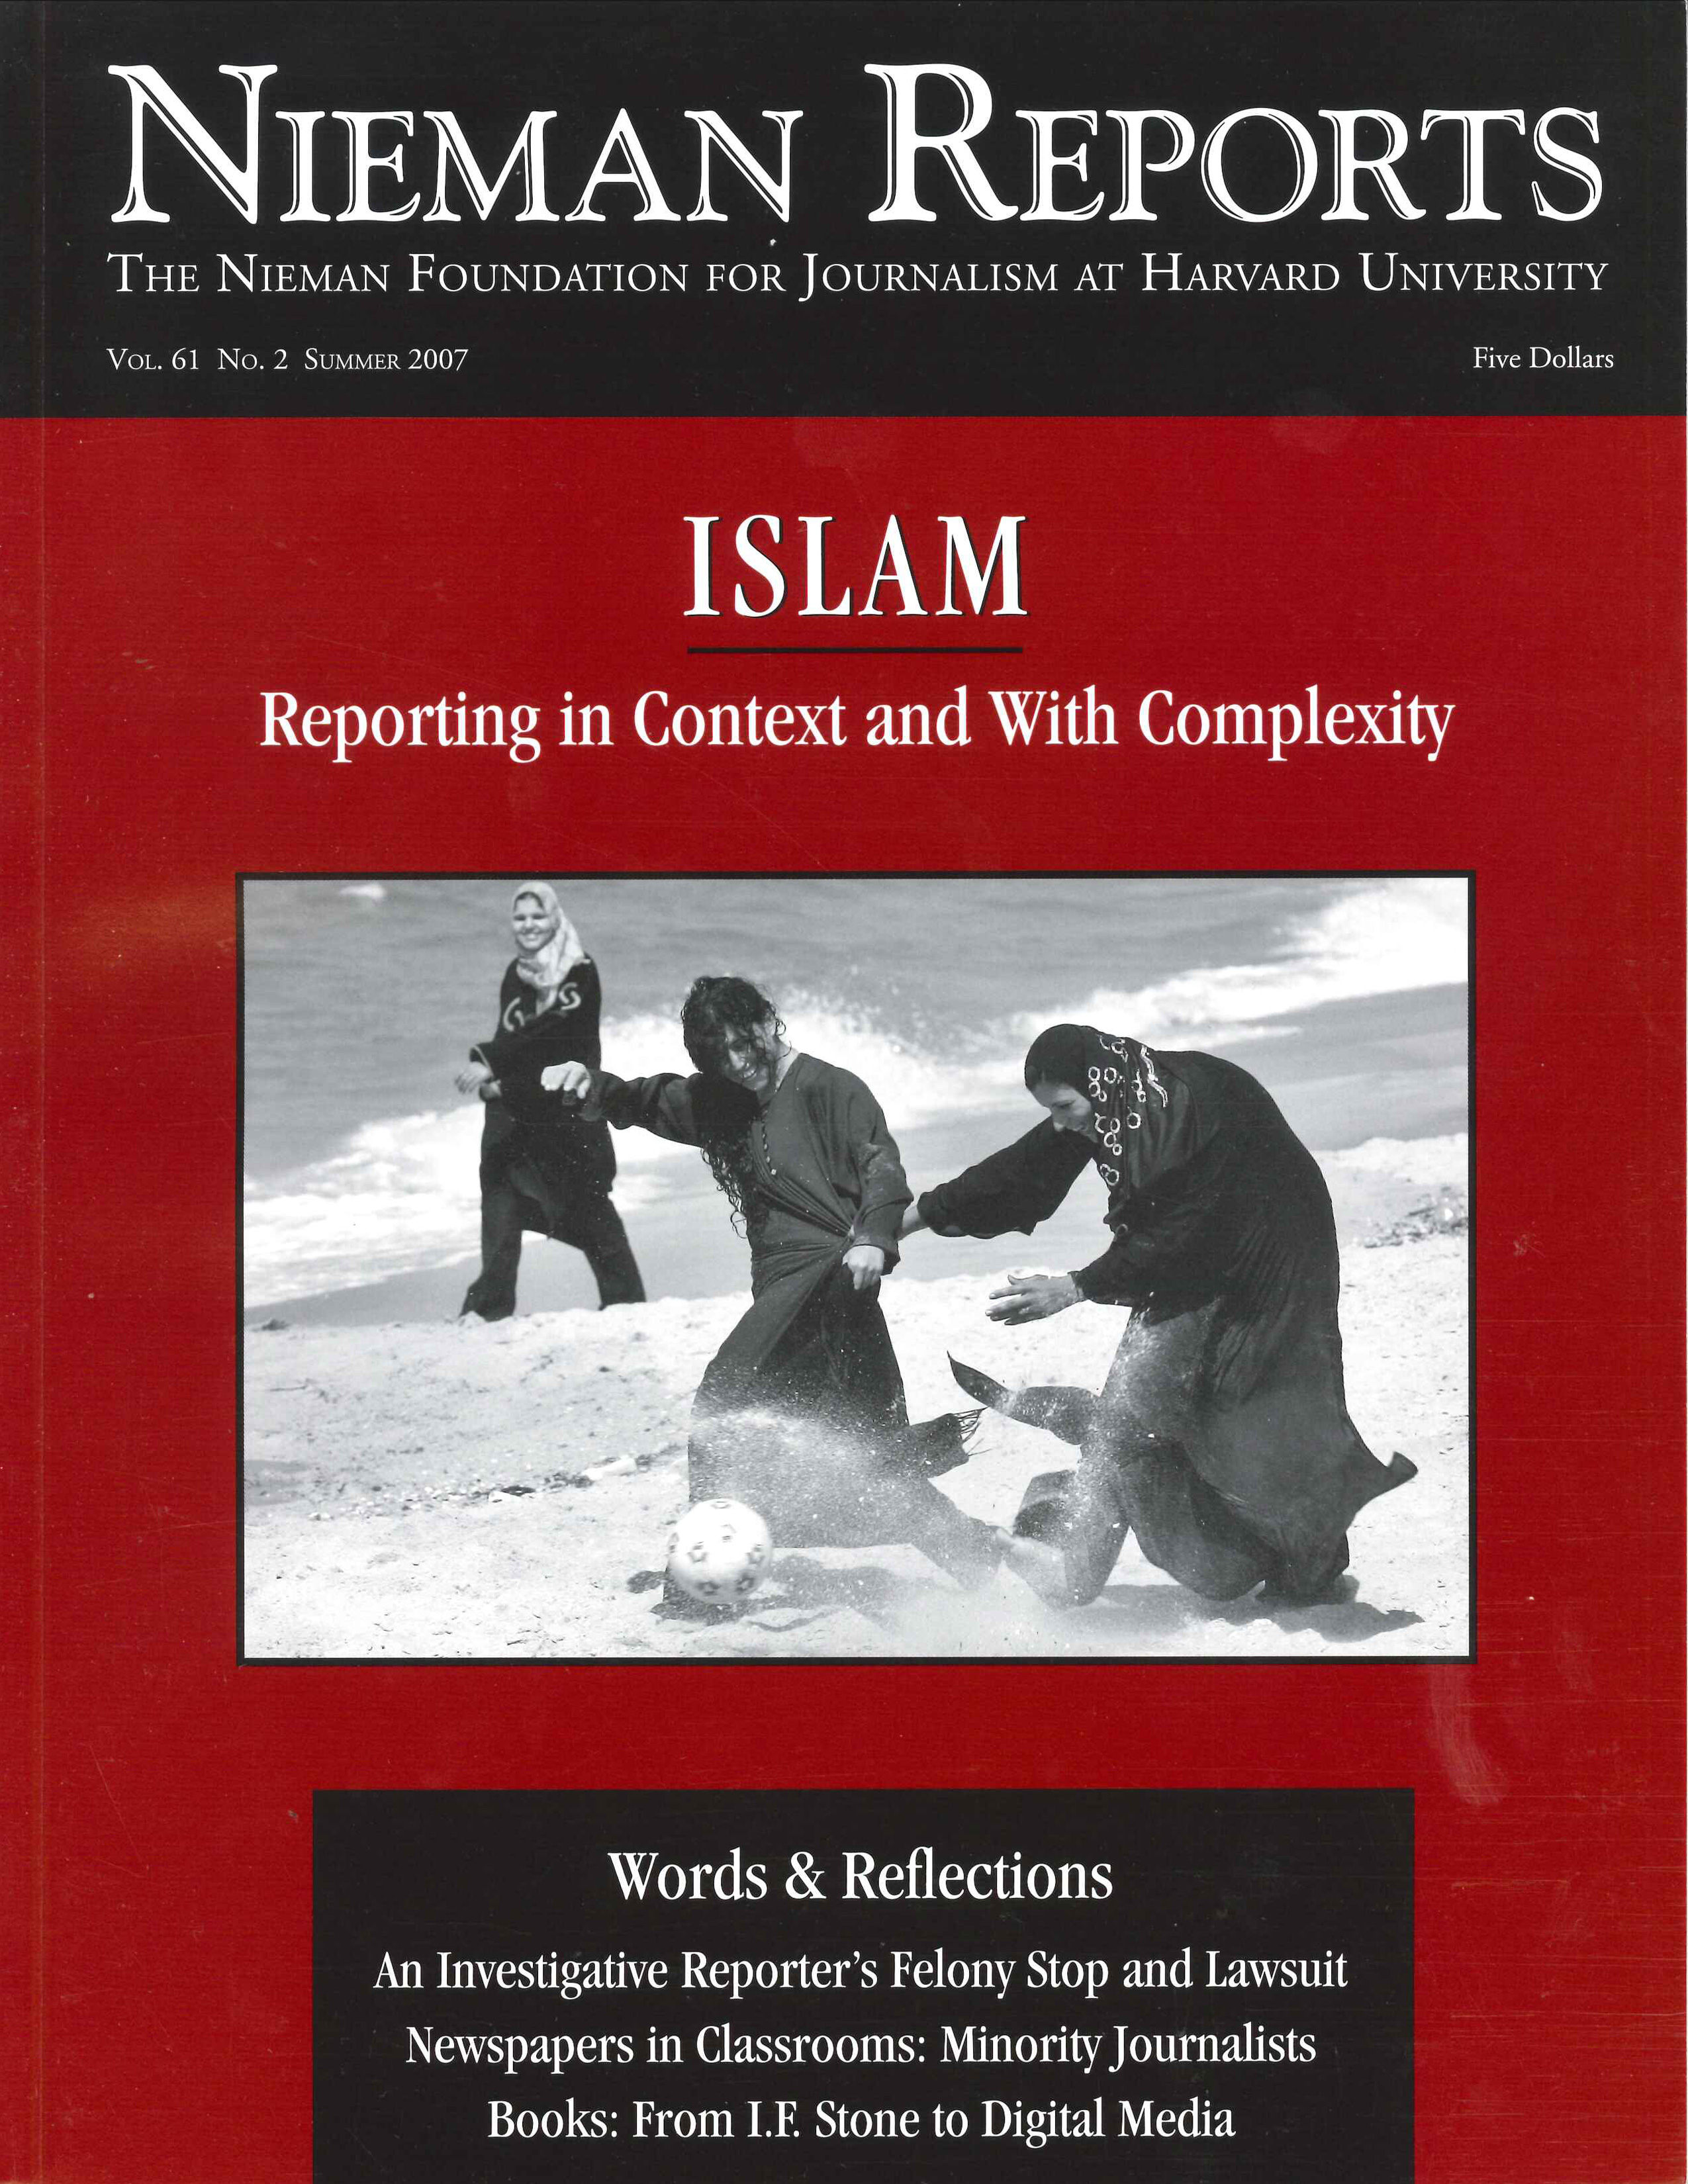 Islam: Reporting in Context and With Complexity